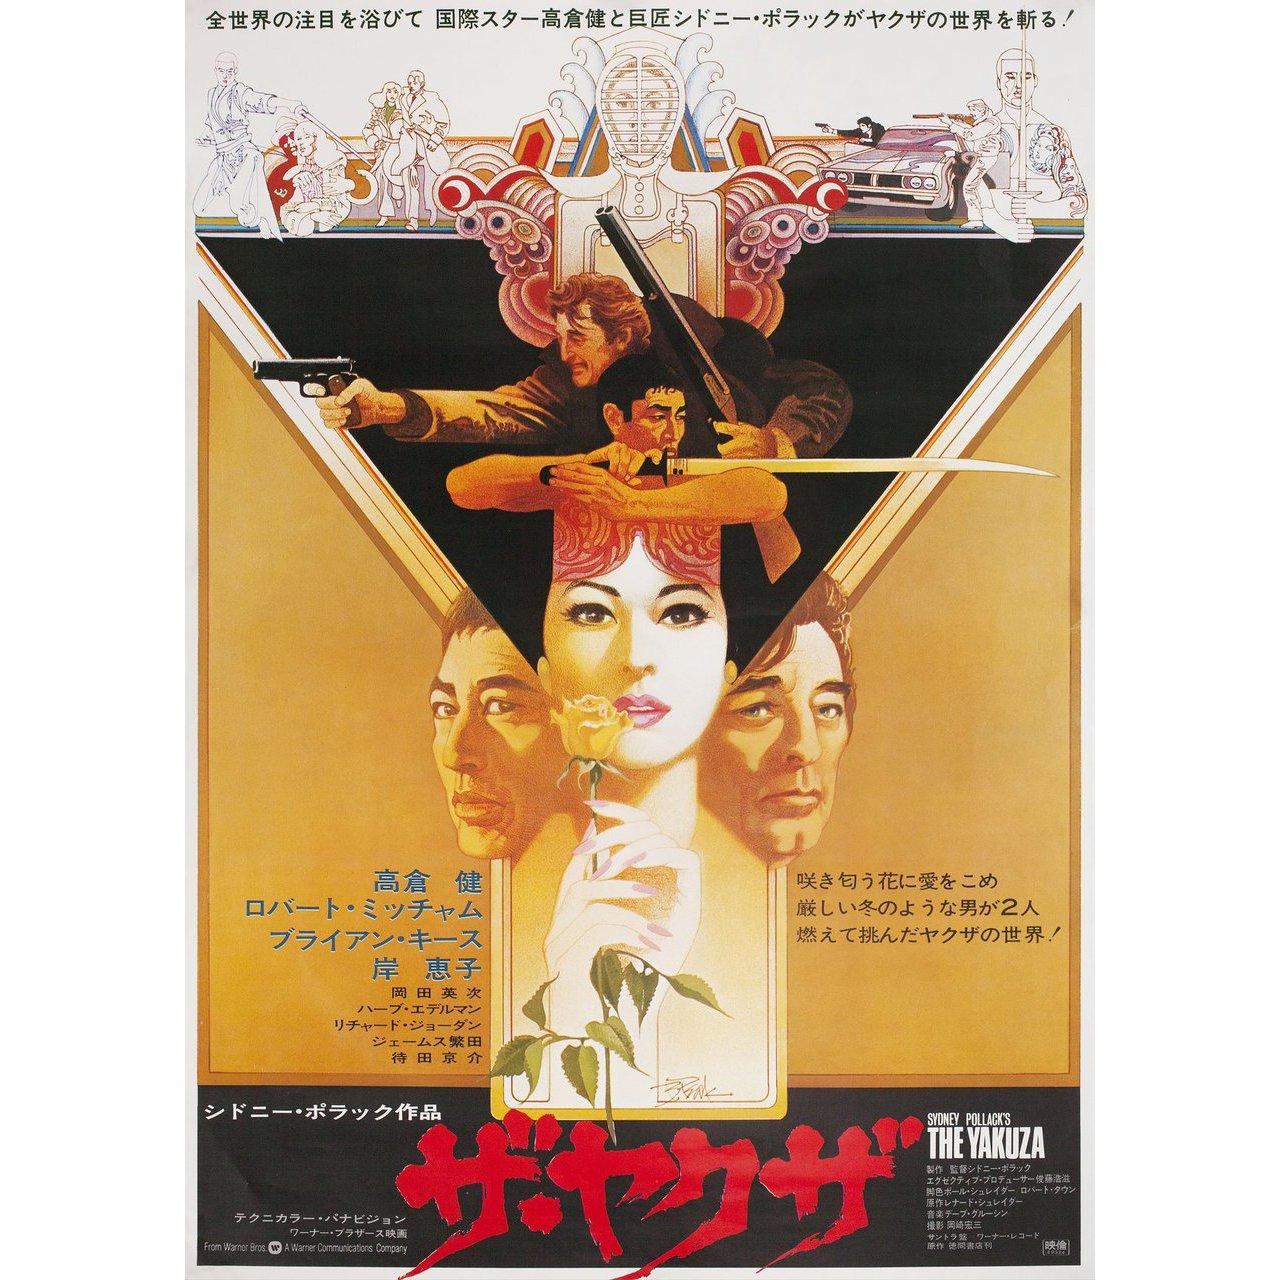 Original 1996 Japanese B2 poster by Bob Peak for the 1974 film The Yakuza directed by Sydney Pollack with Robert Mitchum / Ken Takakura / Brian Keith / Herb Edelman. Very good-fine condition, rolled. Please note: the size is stated in inches and the